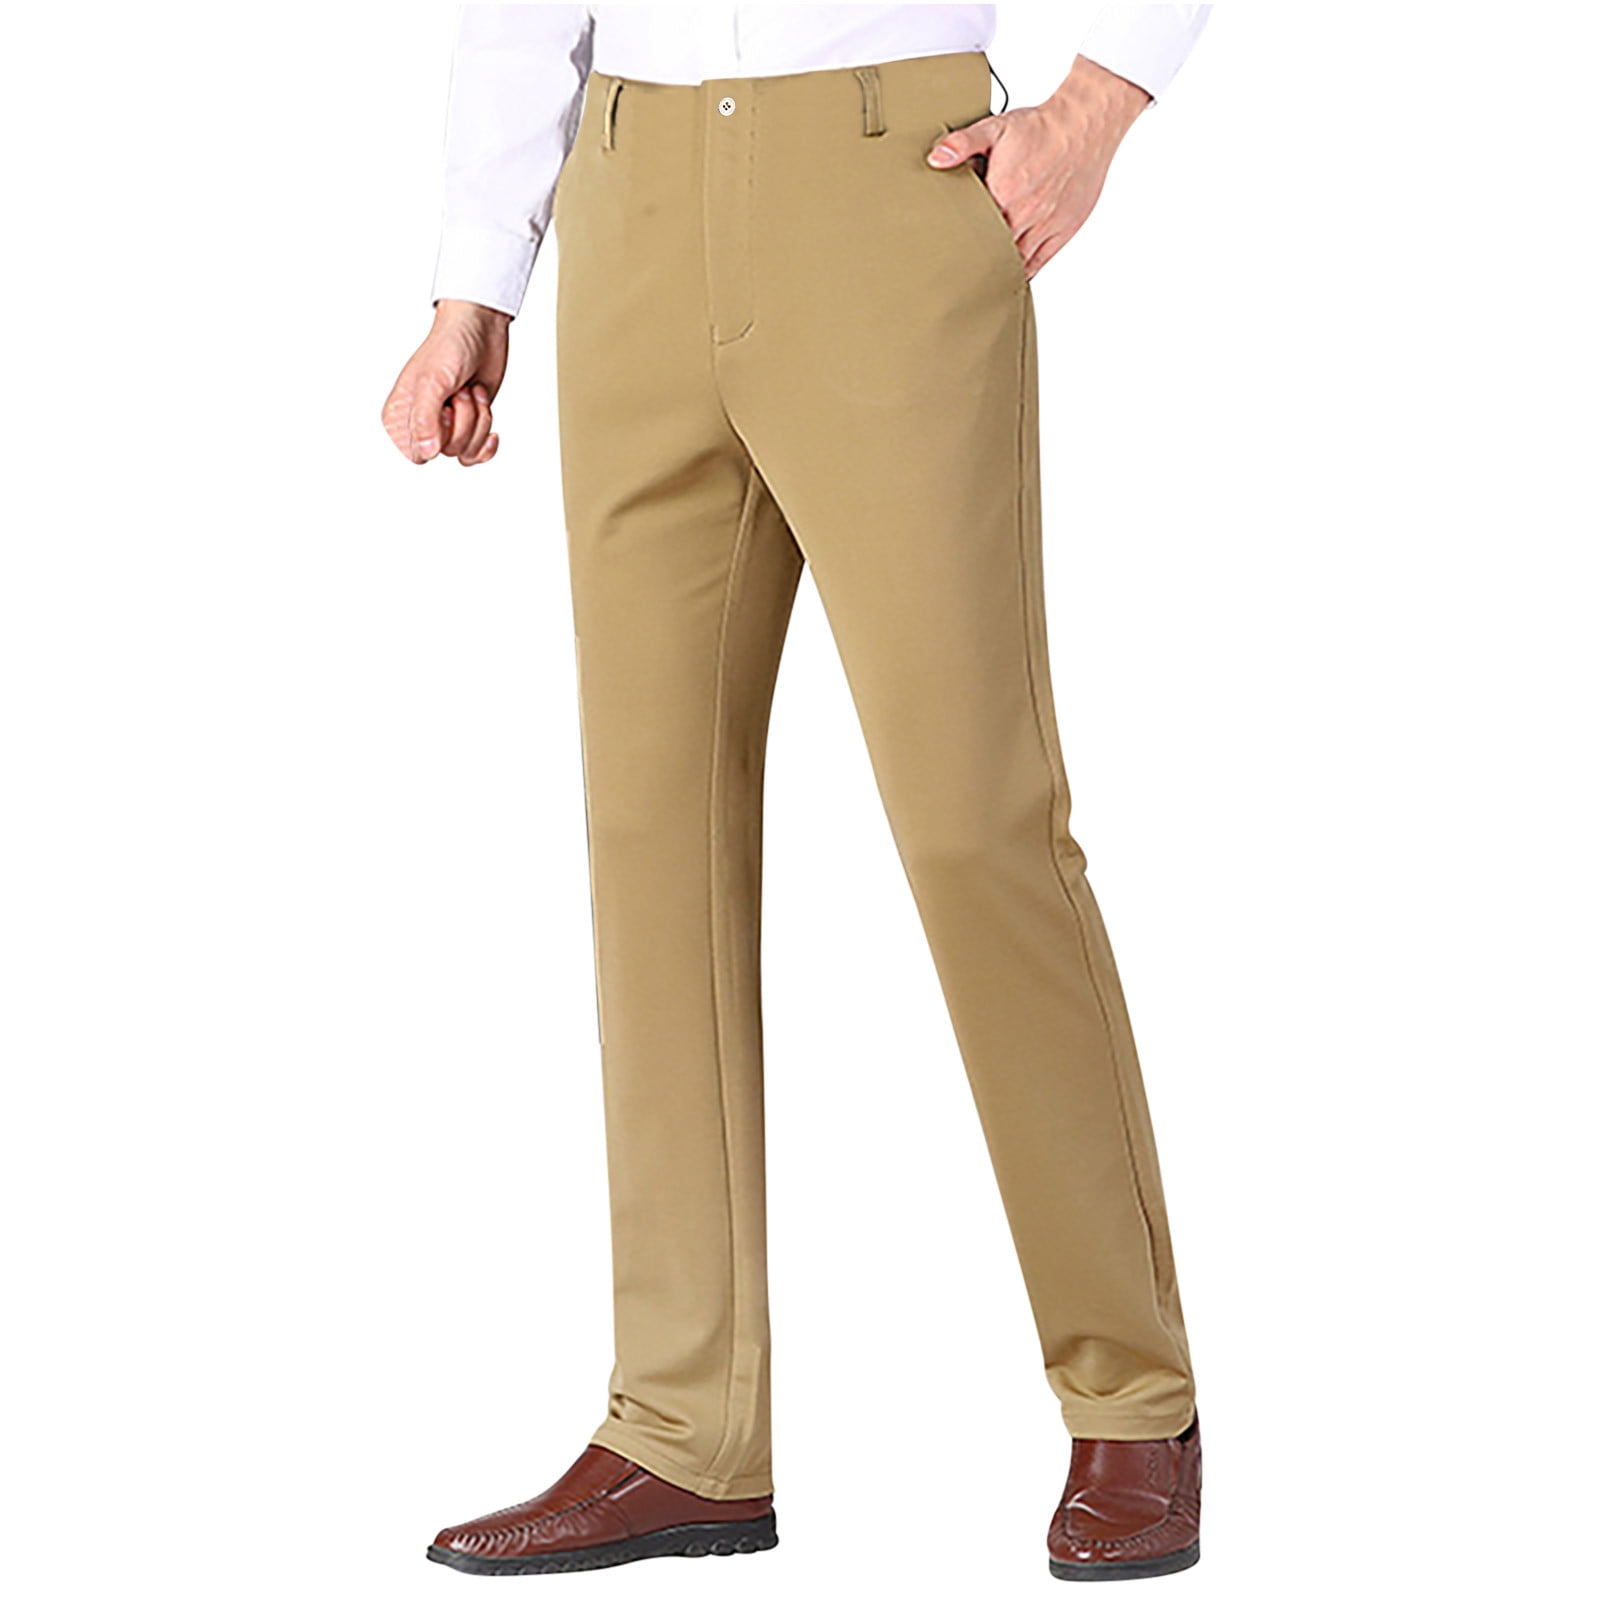 Brglopf Men's Stretch Dress Pants Slim Fit Skinny Suit Pants Business  Trousers Solid Color Suit Pants Work Office Trousers with Pockets